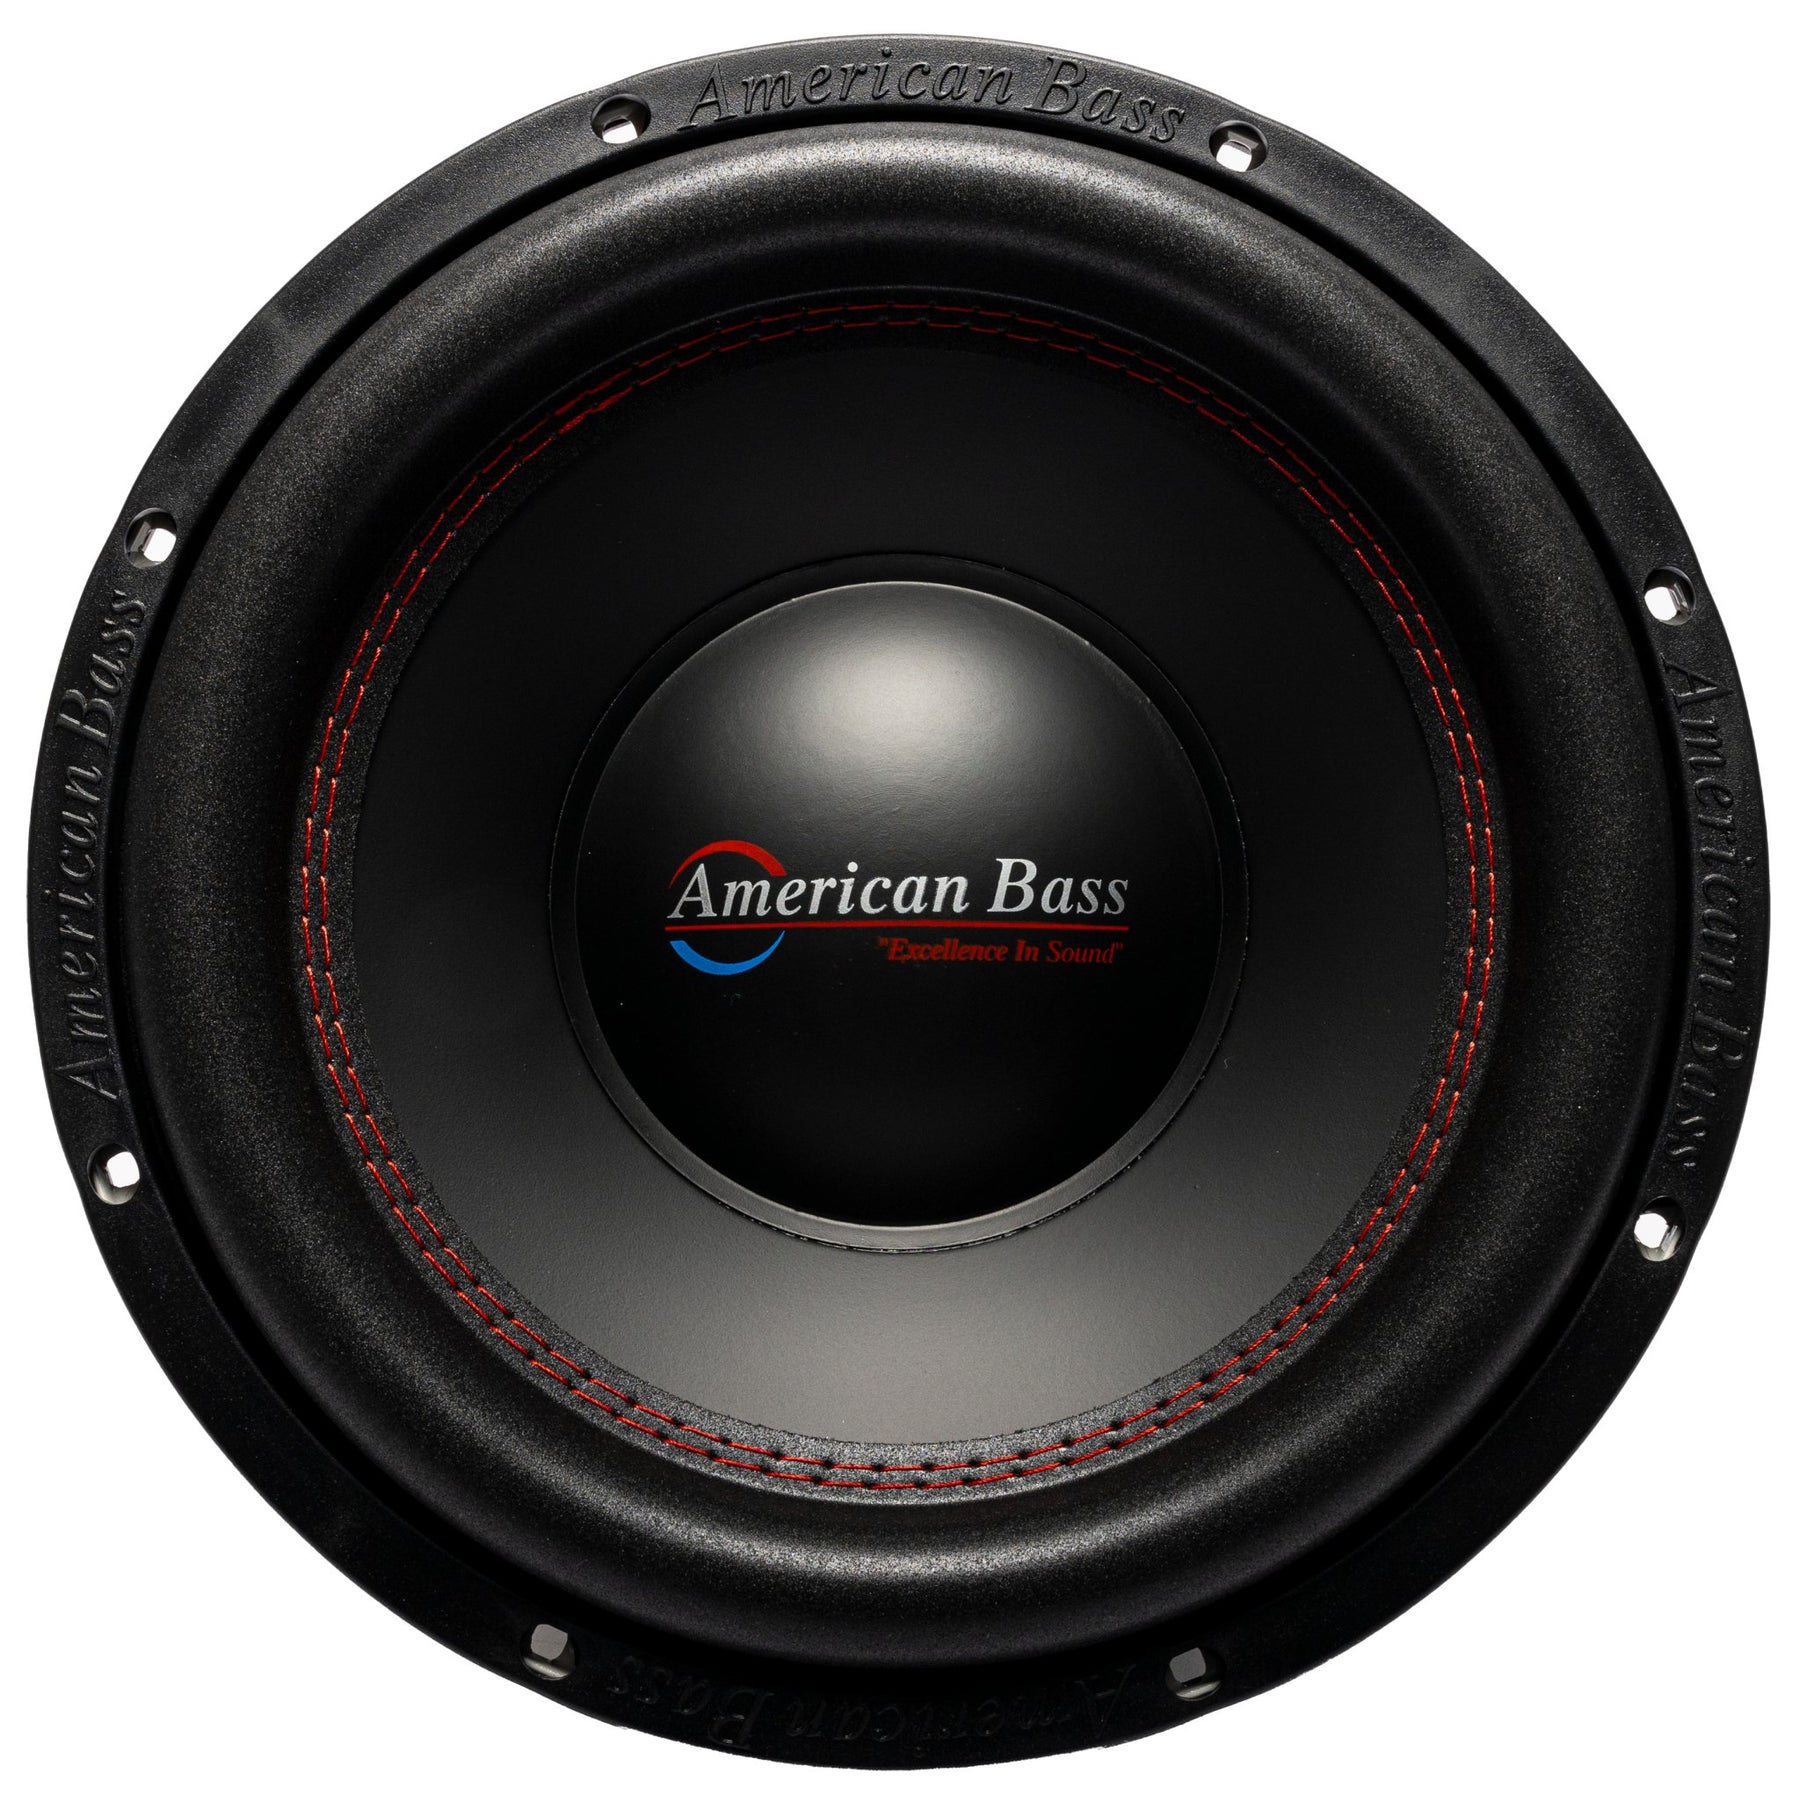 DX 12" Subwoofer - American Bass Audio